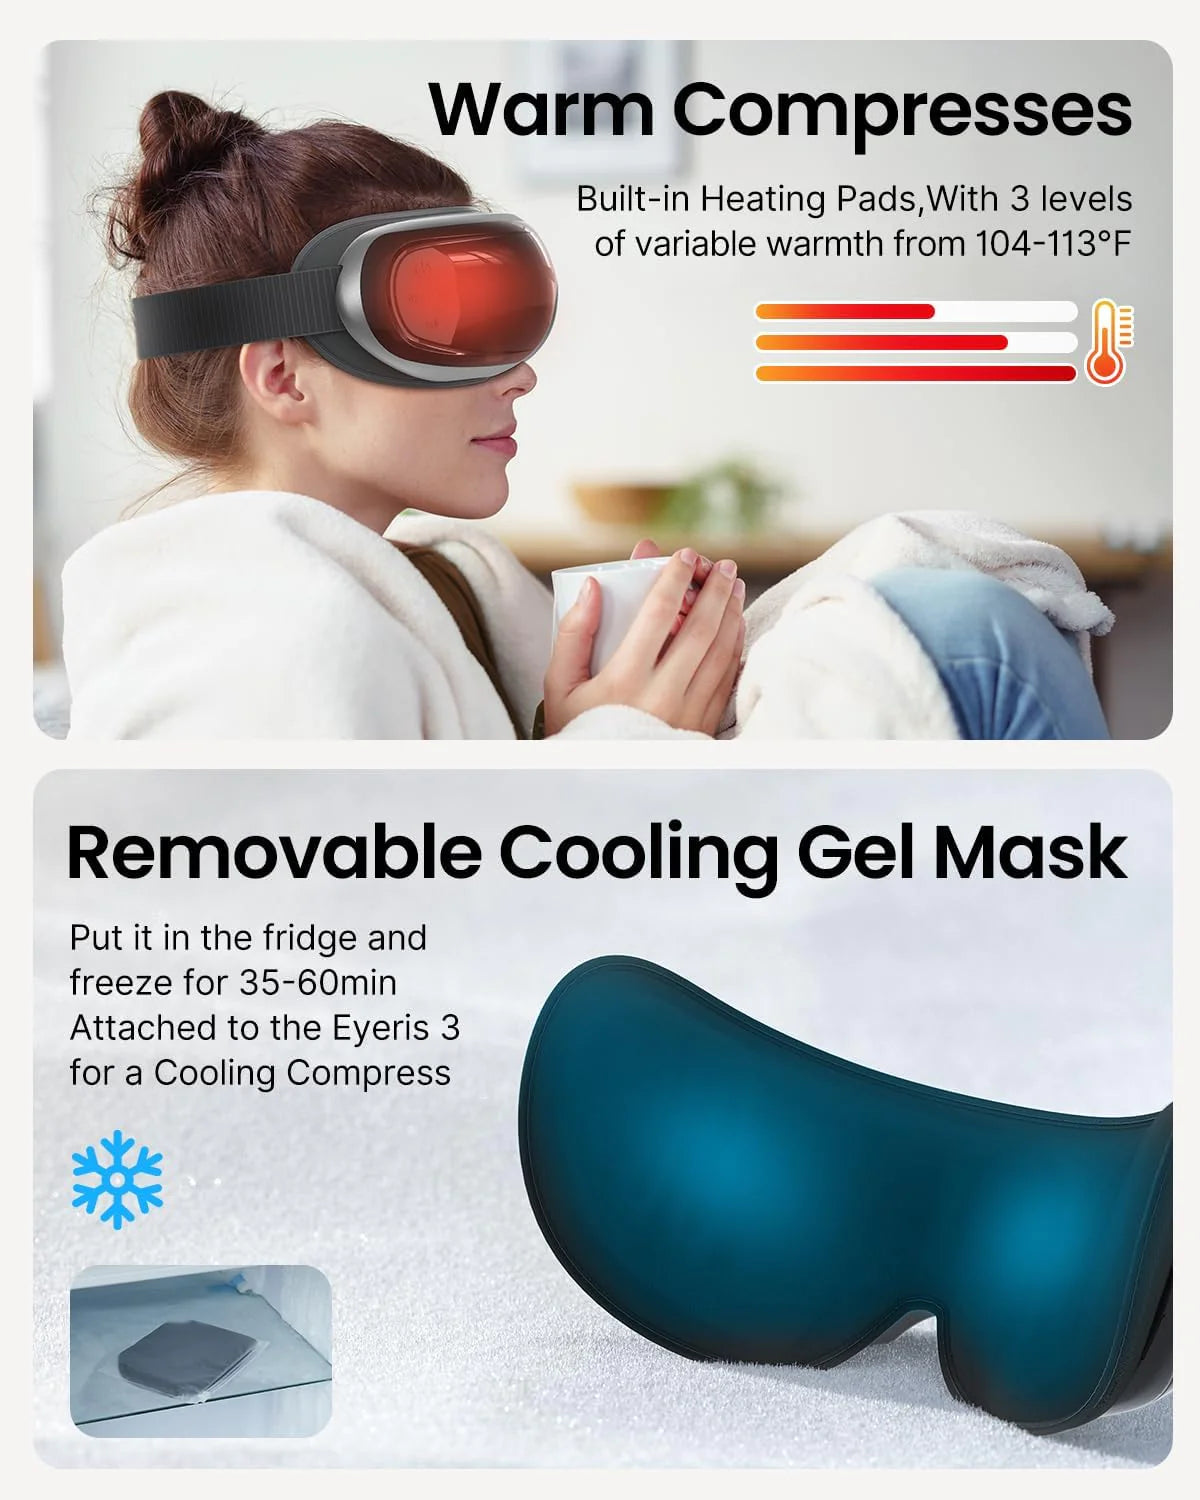 A promotional image for an eye mask product. The top half shows a woman using a heated Eyeris 3 Eye Massager with hands-free control and text: "Warm Compresses. Built-in Heating Pads, With 3 levels of variable warmth from 104-113°F." The bottom half showcases a Cooling Gel Mask with text: "Removable Cooling Gel Mask. Put it in the fridge and freeze for ultimate relaxation."
Brand Name: Renpho EU